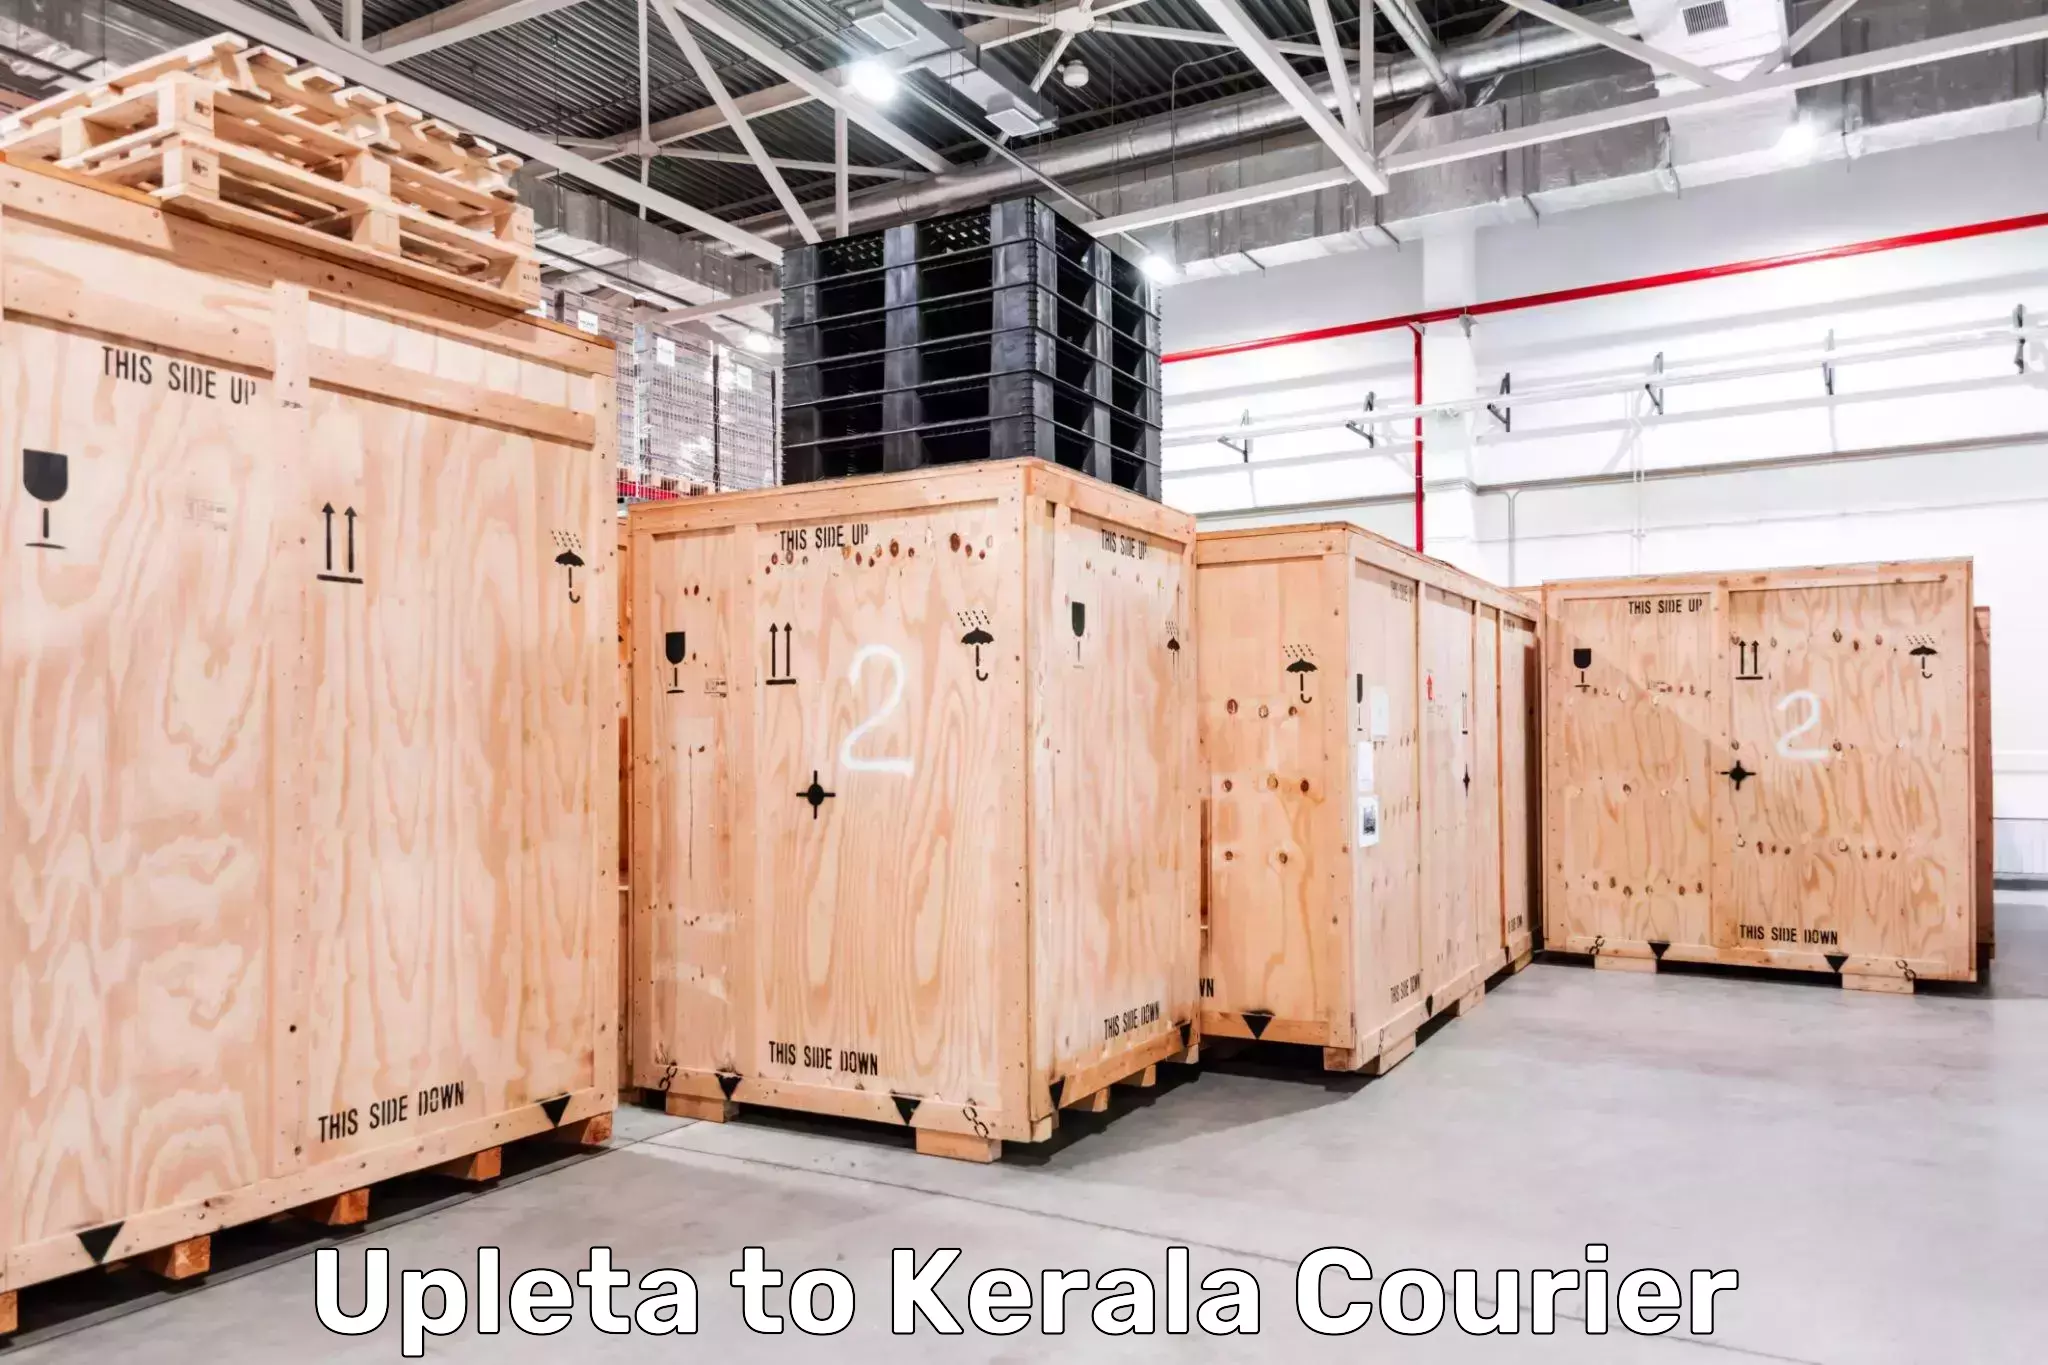 Small business couriers Upleta to Kerala